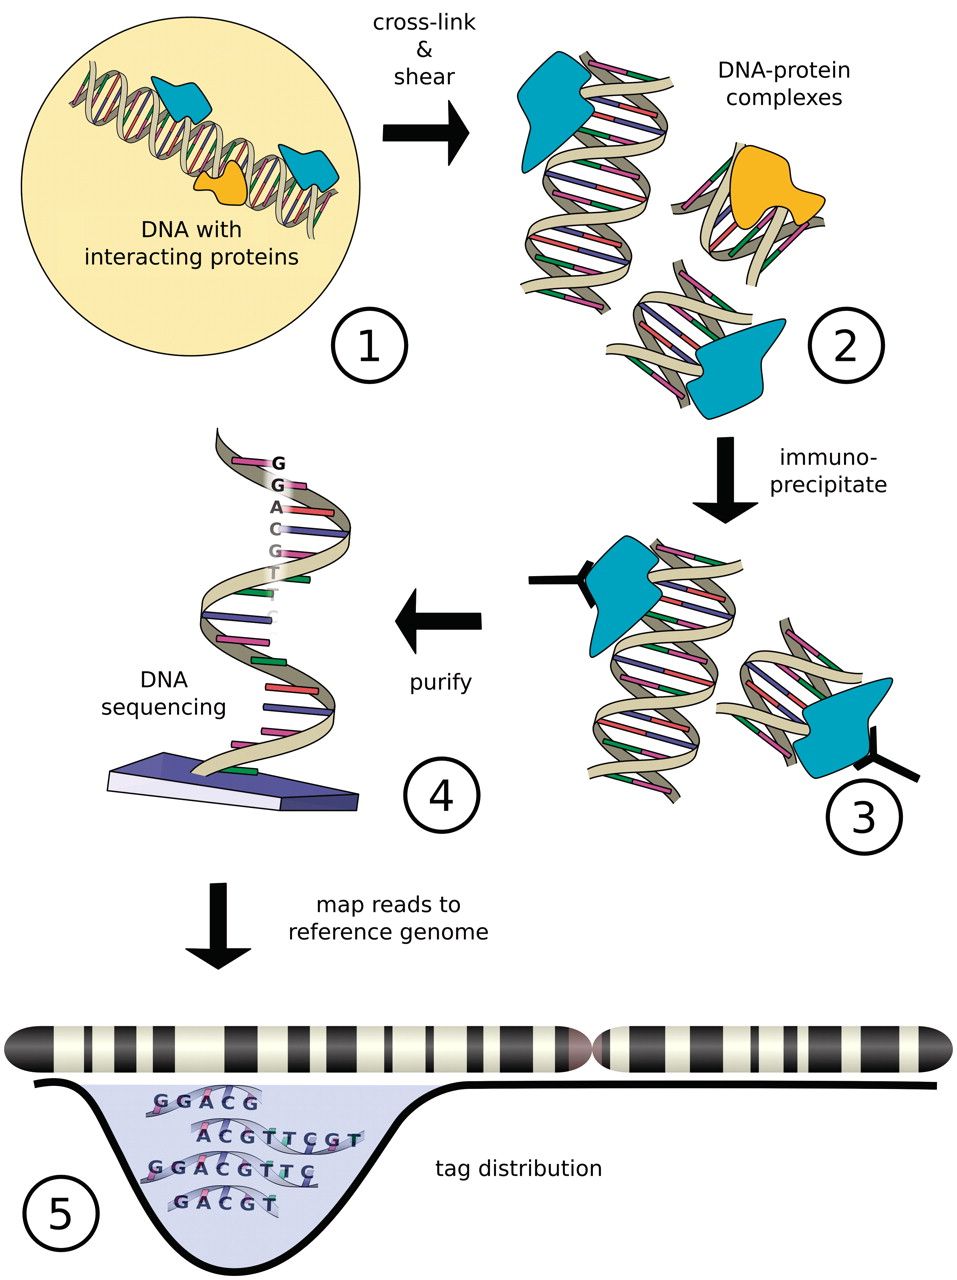 Cartoon of Chromatin immuno-precipitation. DNA interacts with proteins, this is cross-linked and sheared into DNA-protein complexes, immunoprecipitated, purified, and the bound DNA is sequenced. This is then mapped to a reference genome and the tag distribution is plotted along a chromosome.